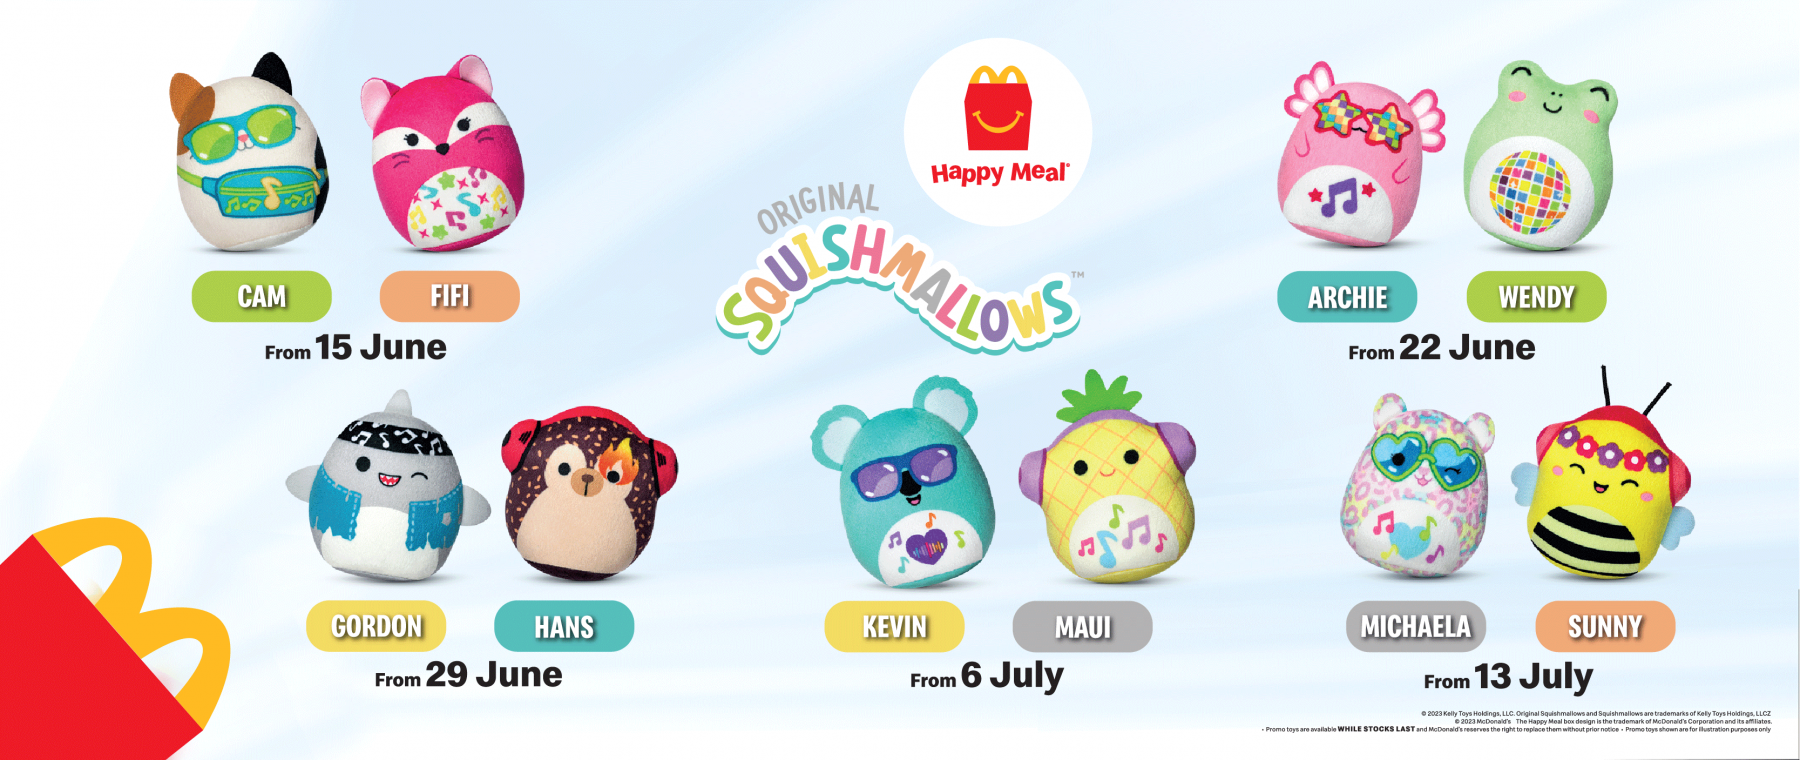 McDonald's Malaysia Squeeze the day with new Original Squishmallows™!